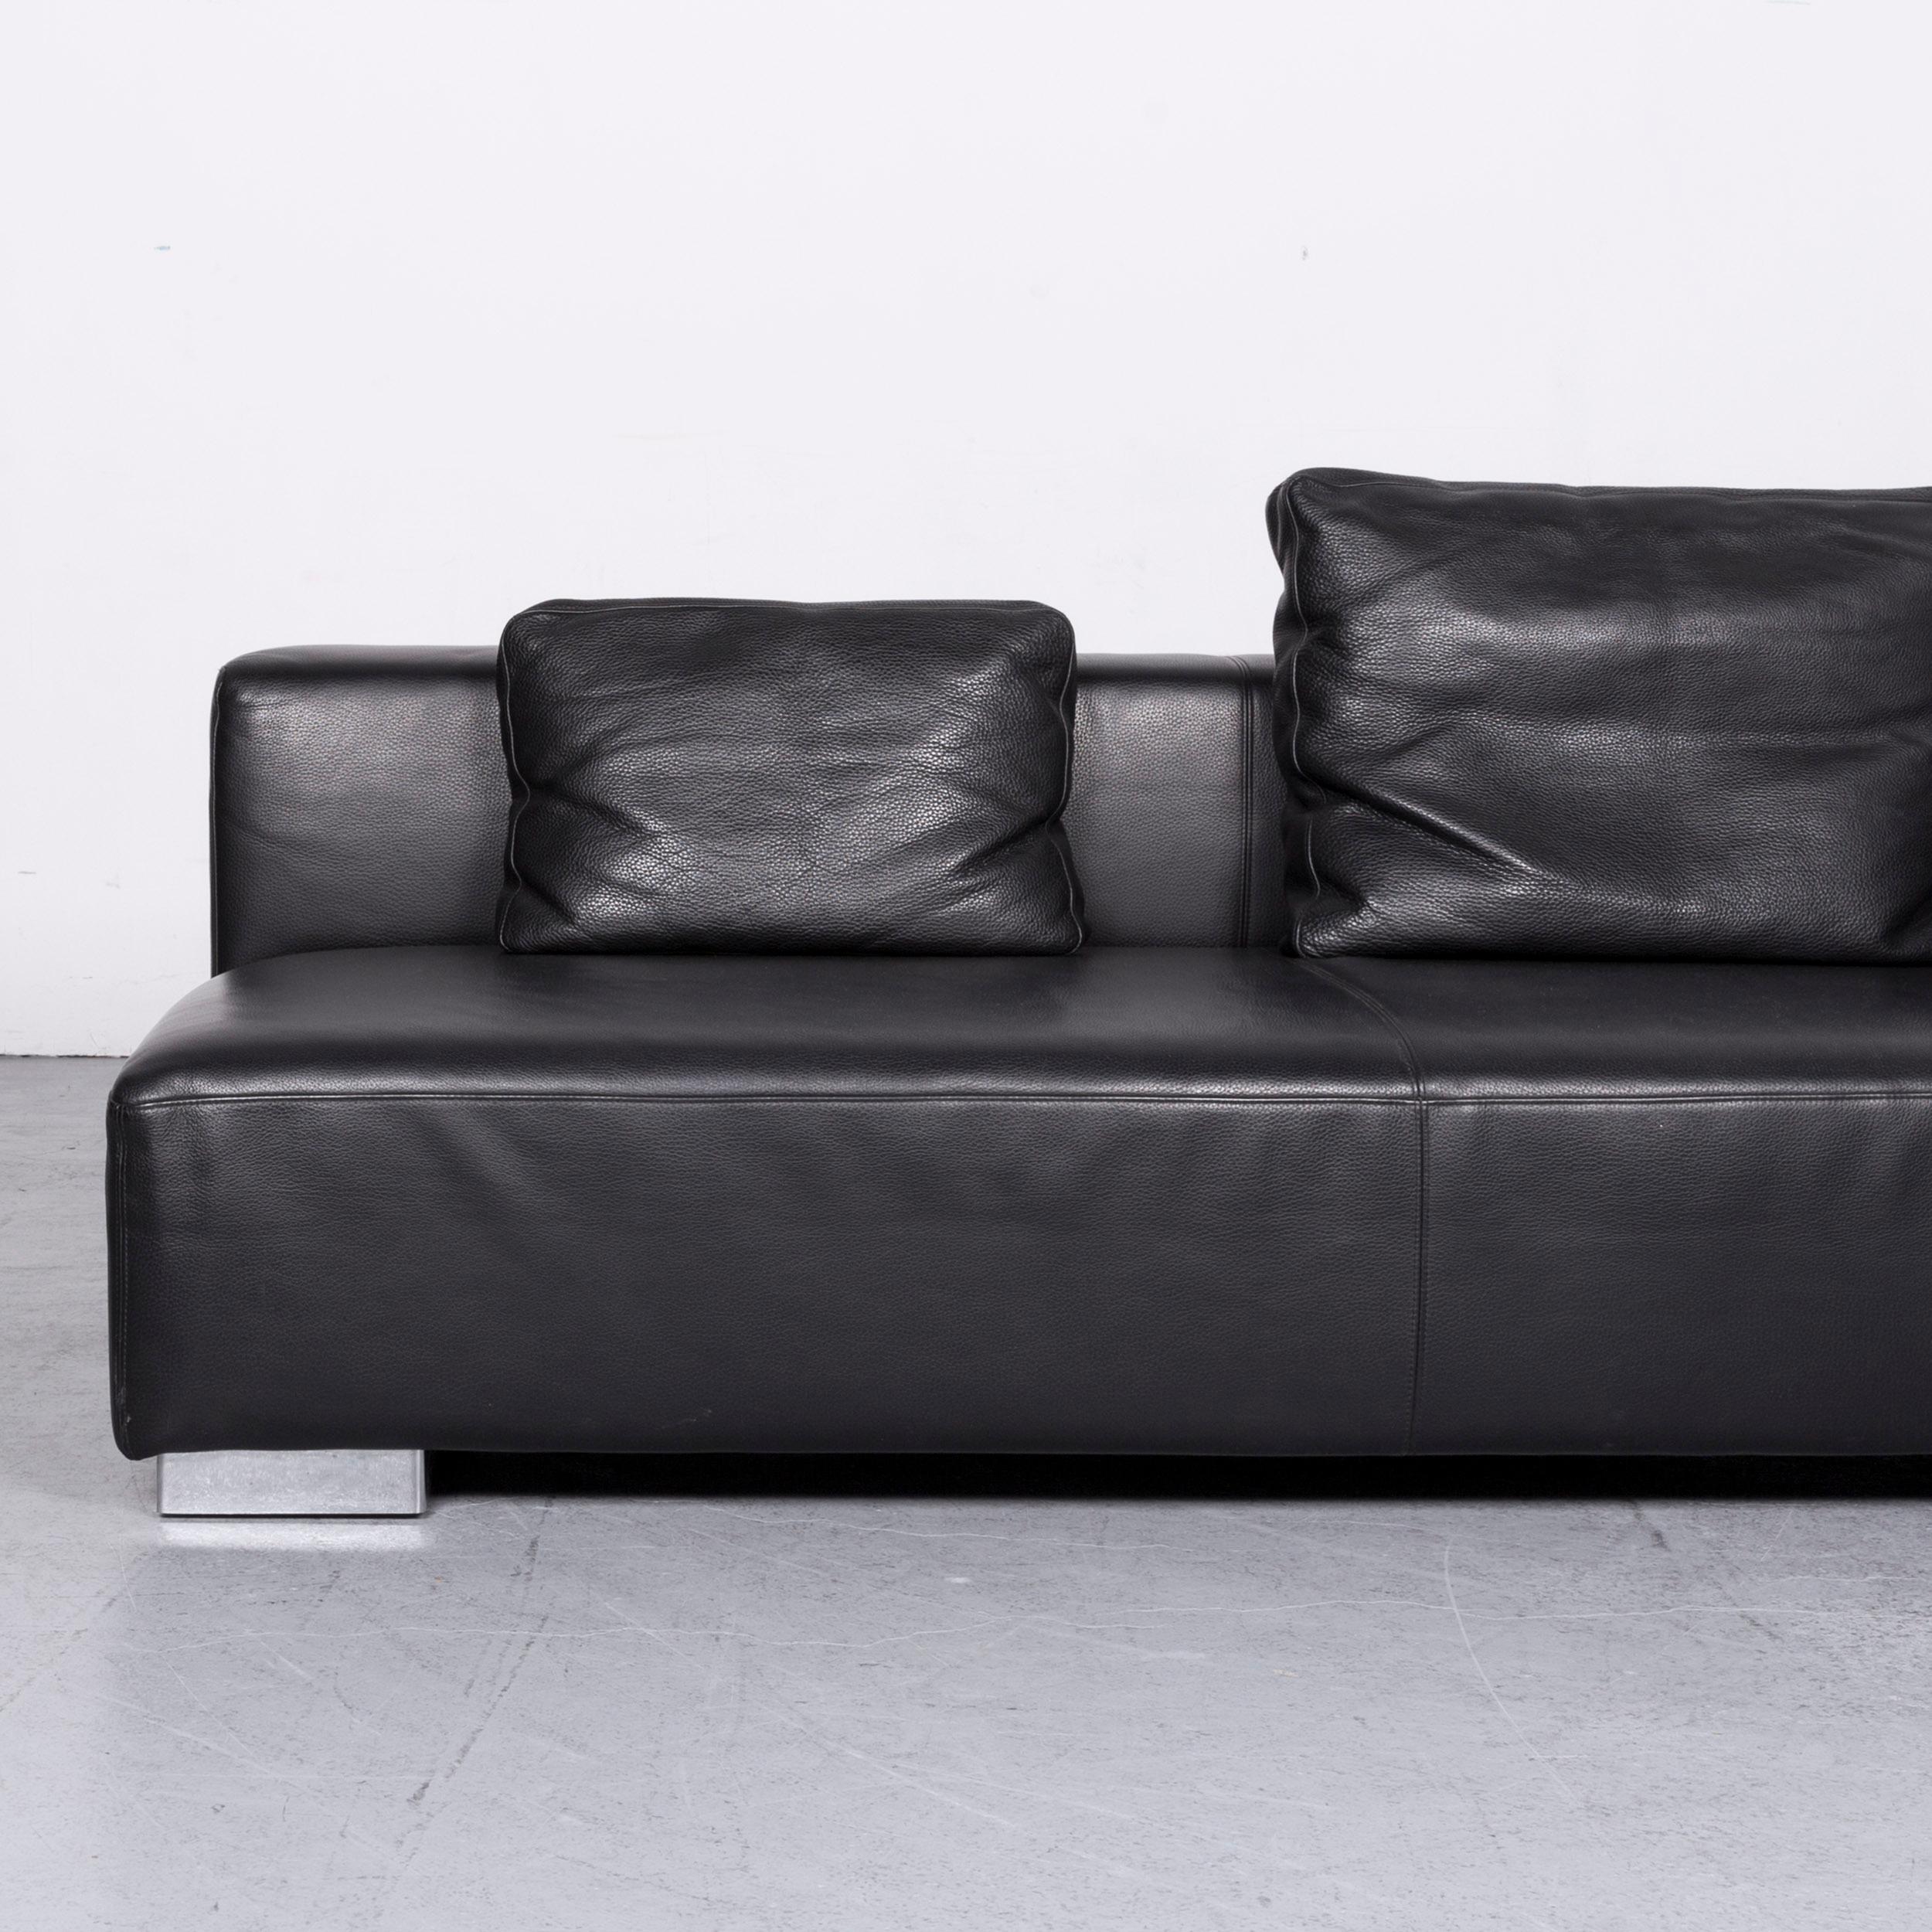 Brühl & Sippold Designer Sofa Set Leather Black Two-Seat Couch Modern For Sale 8